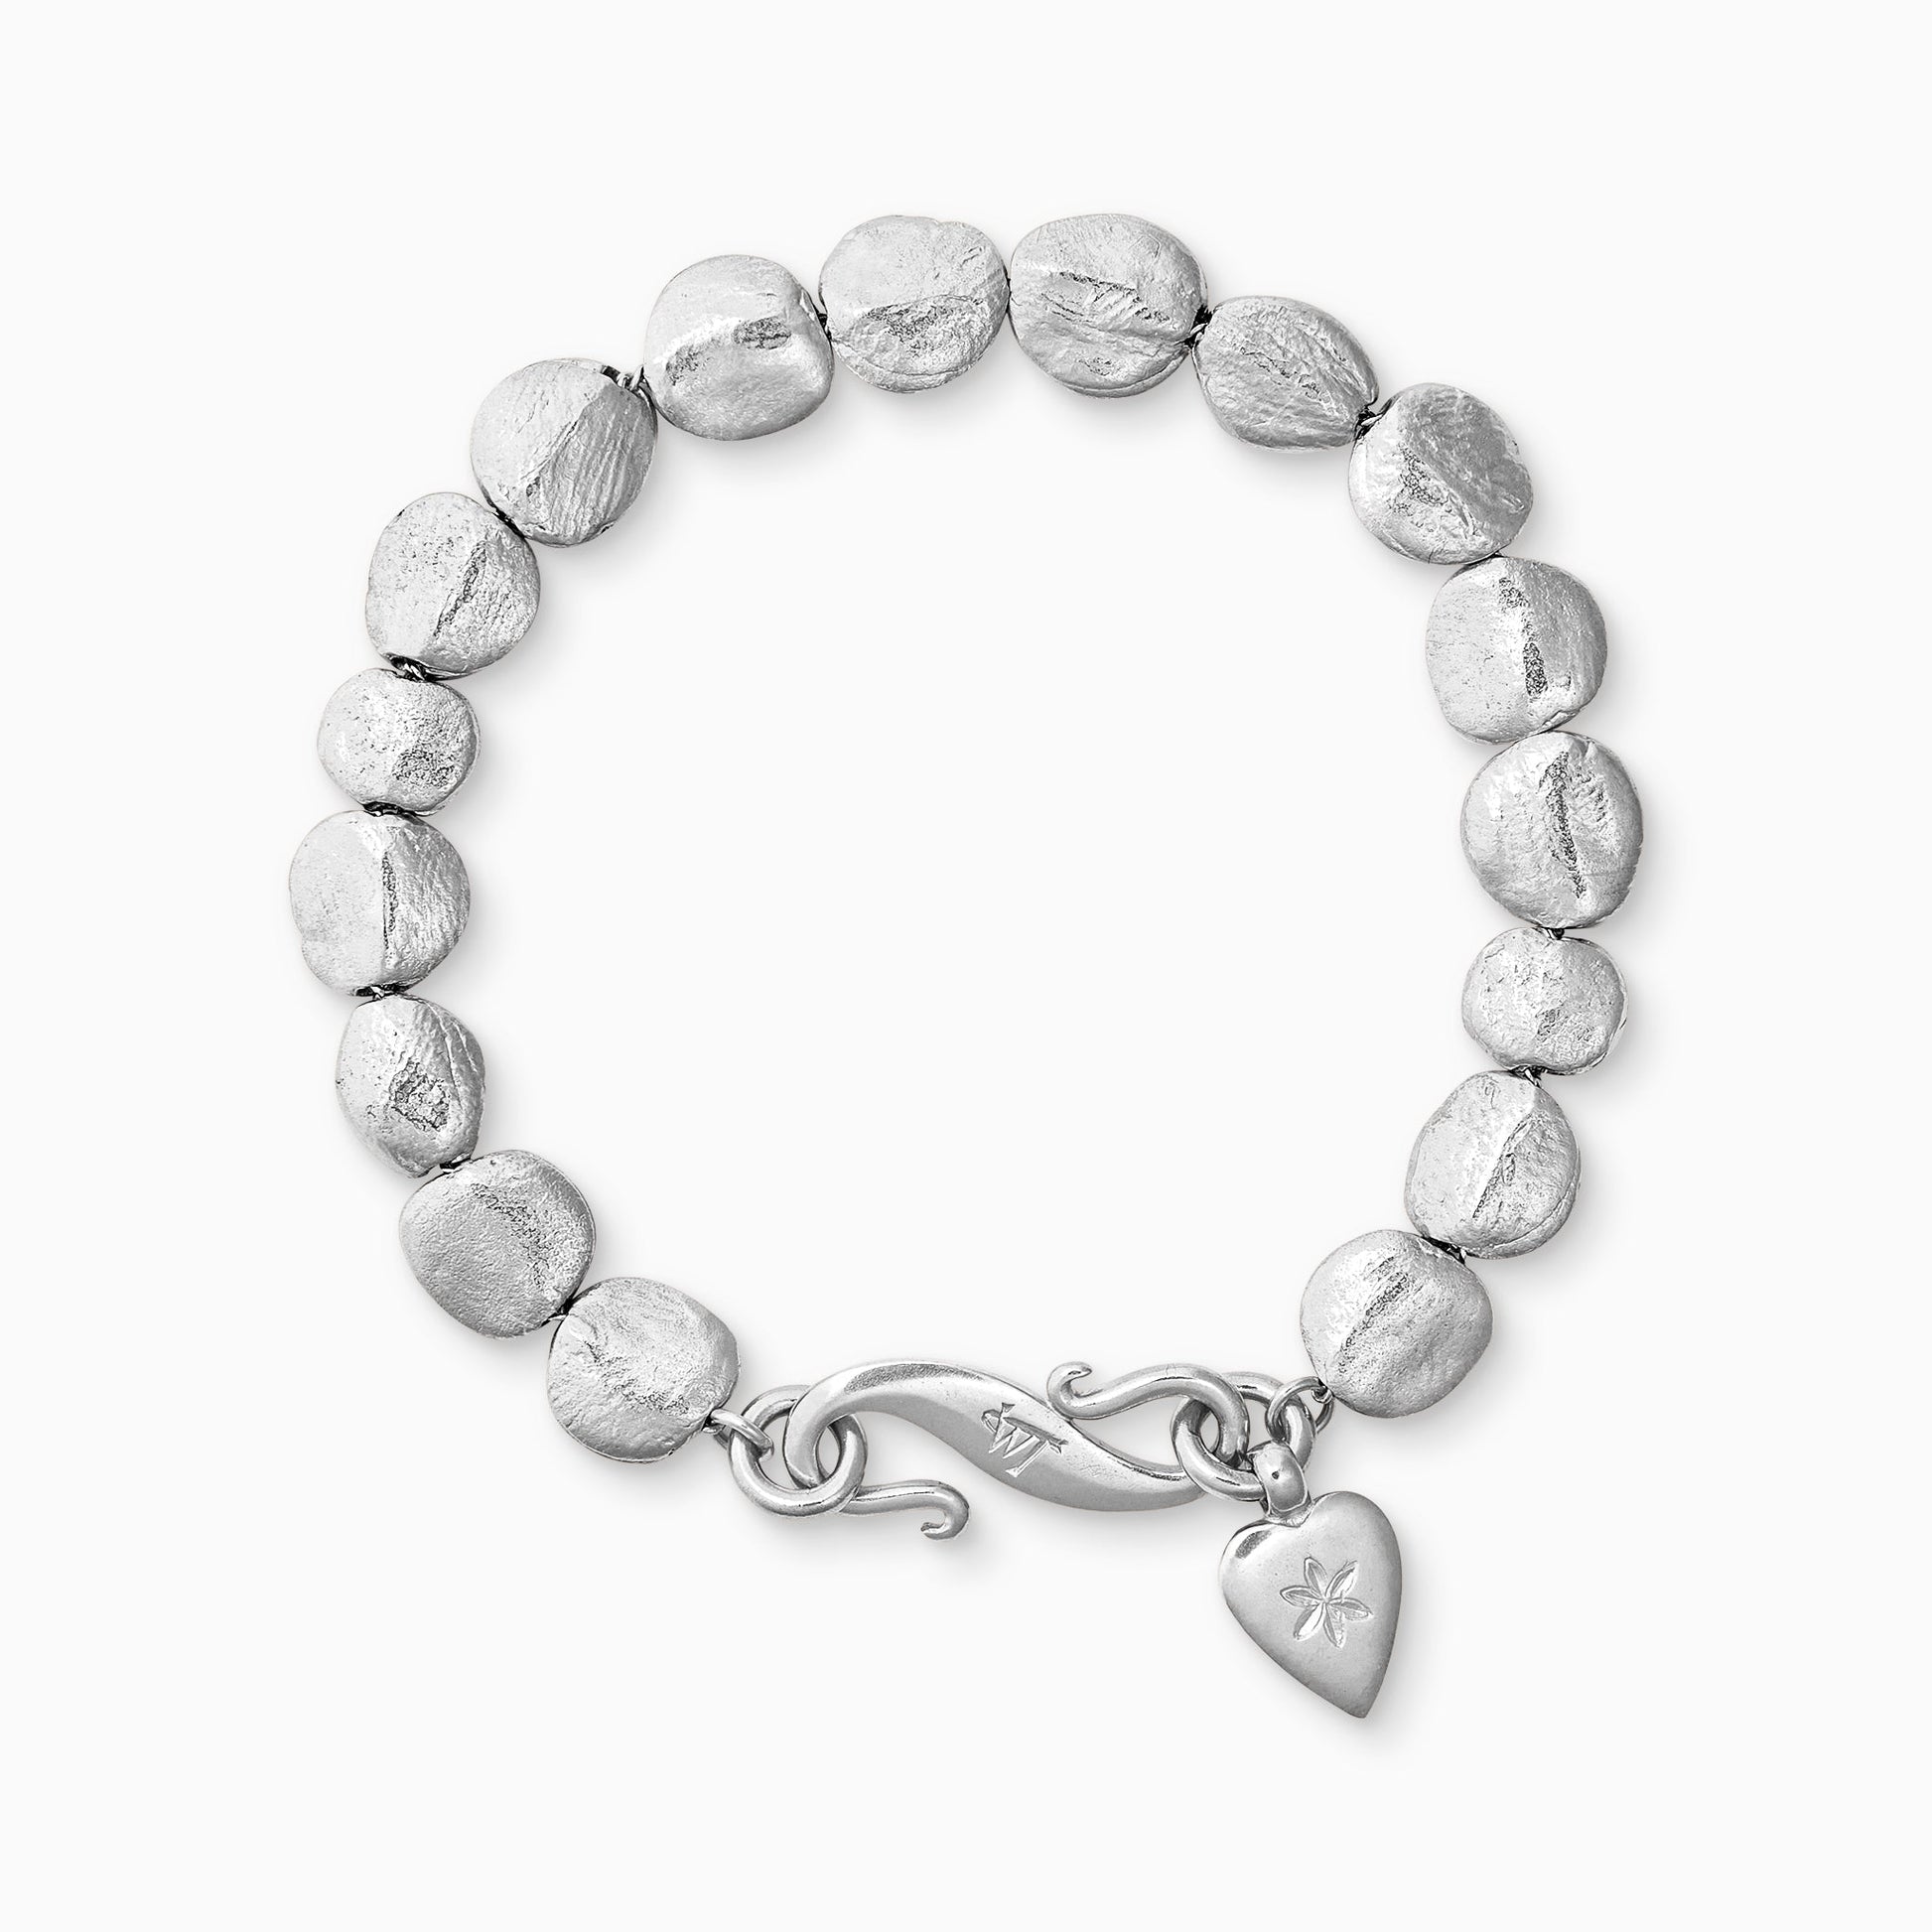 A recycled Silver bracelet of handmade textured beads with a smooth heart shaped charm engraved with a 6 petal flower and our signature ’S’ clasp. Bracelet length 190mm. Beads varying from approximately 7mm x 4mm to 10mm x 11mm